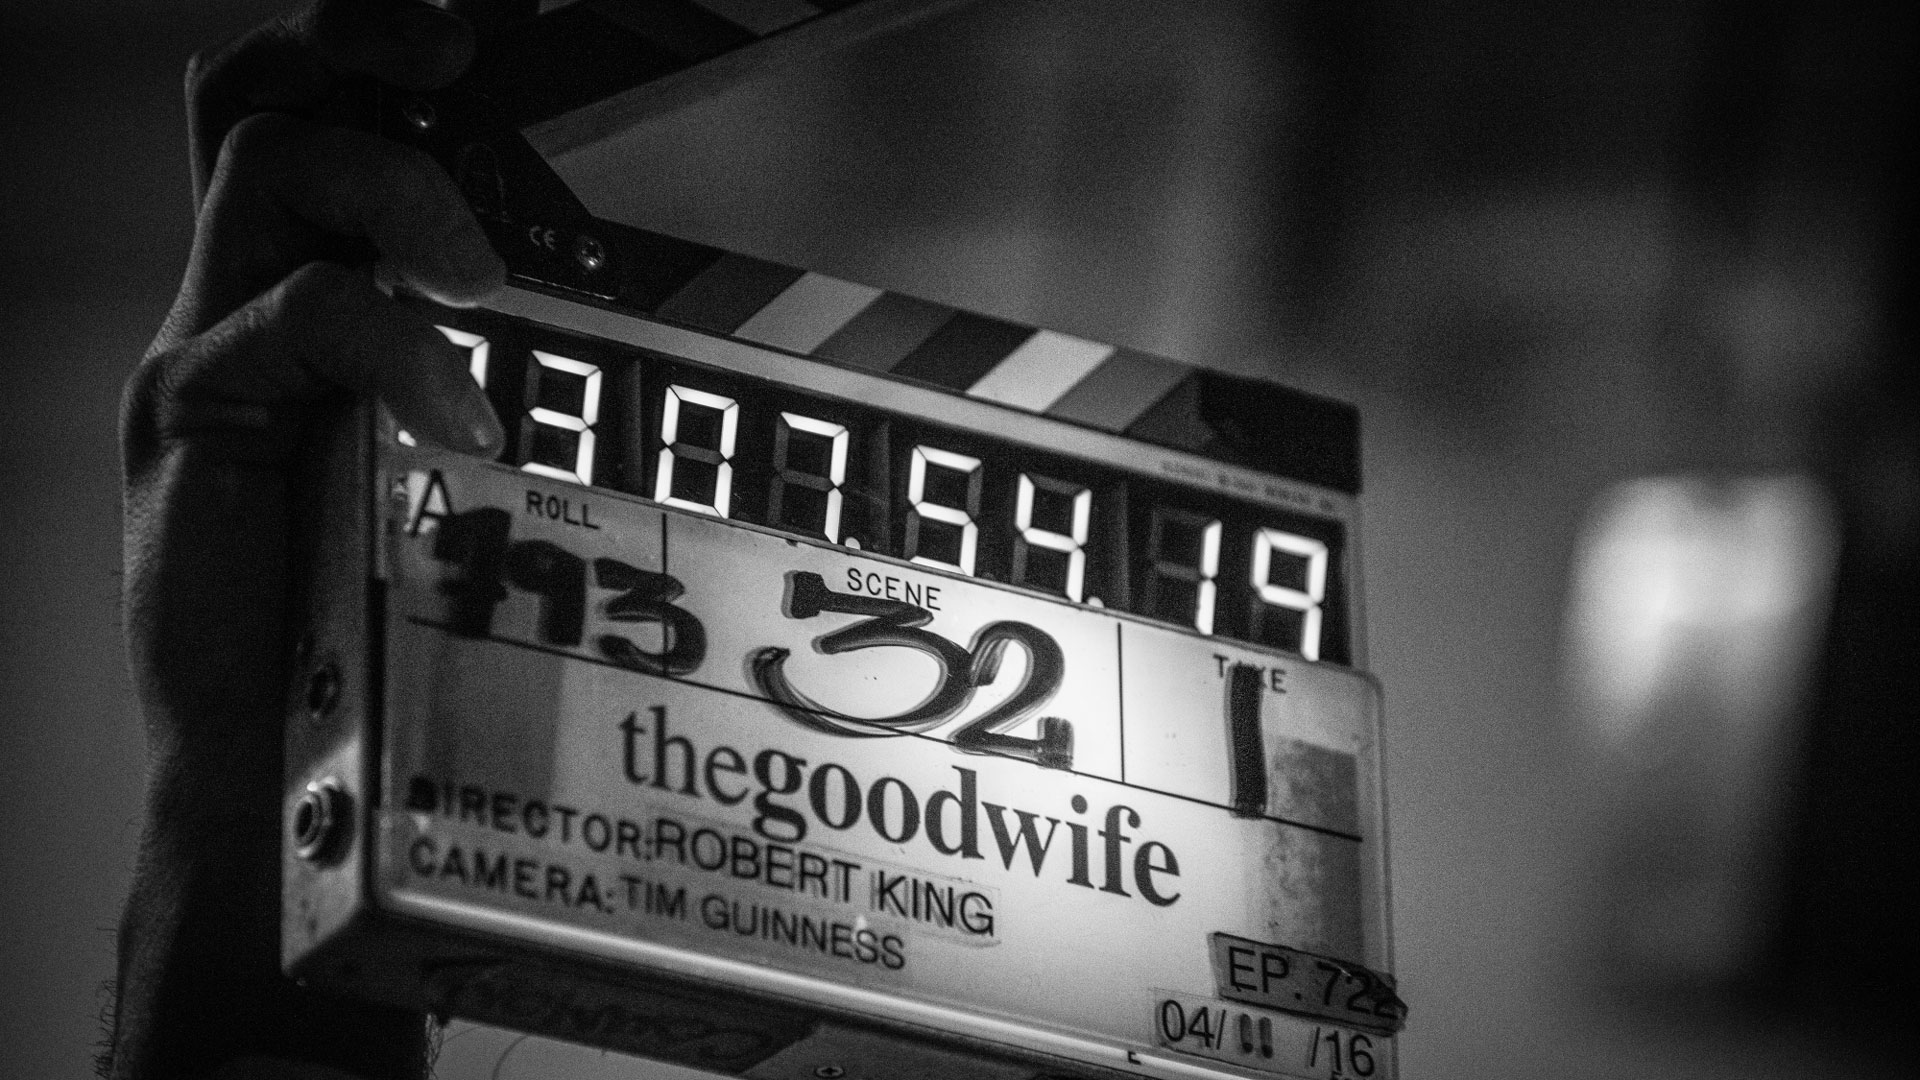 Goodbye to The Good Wife